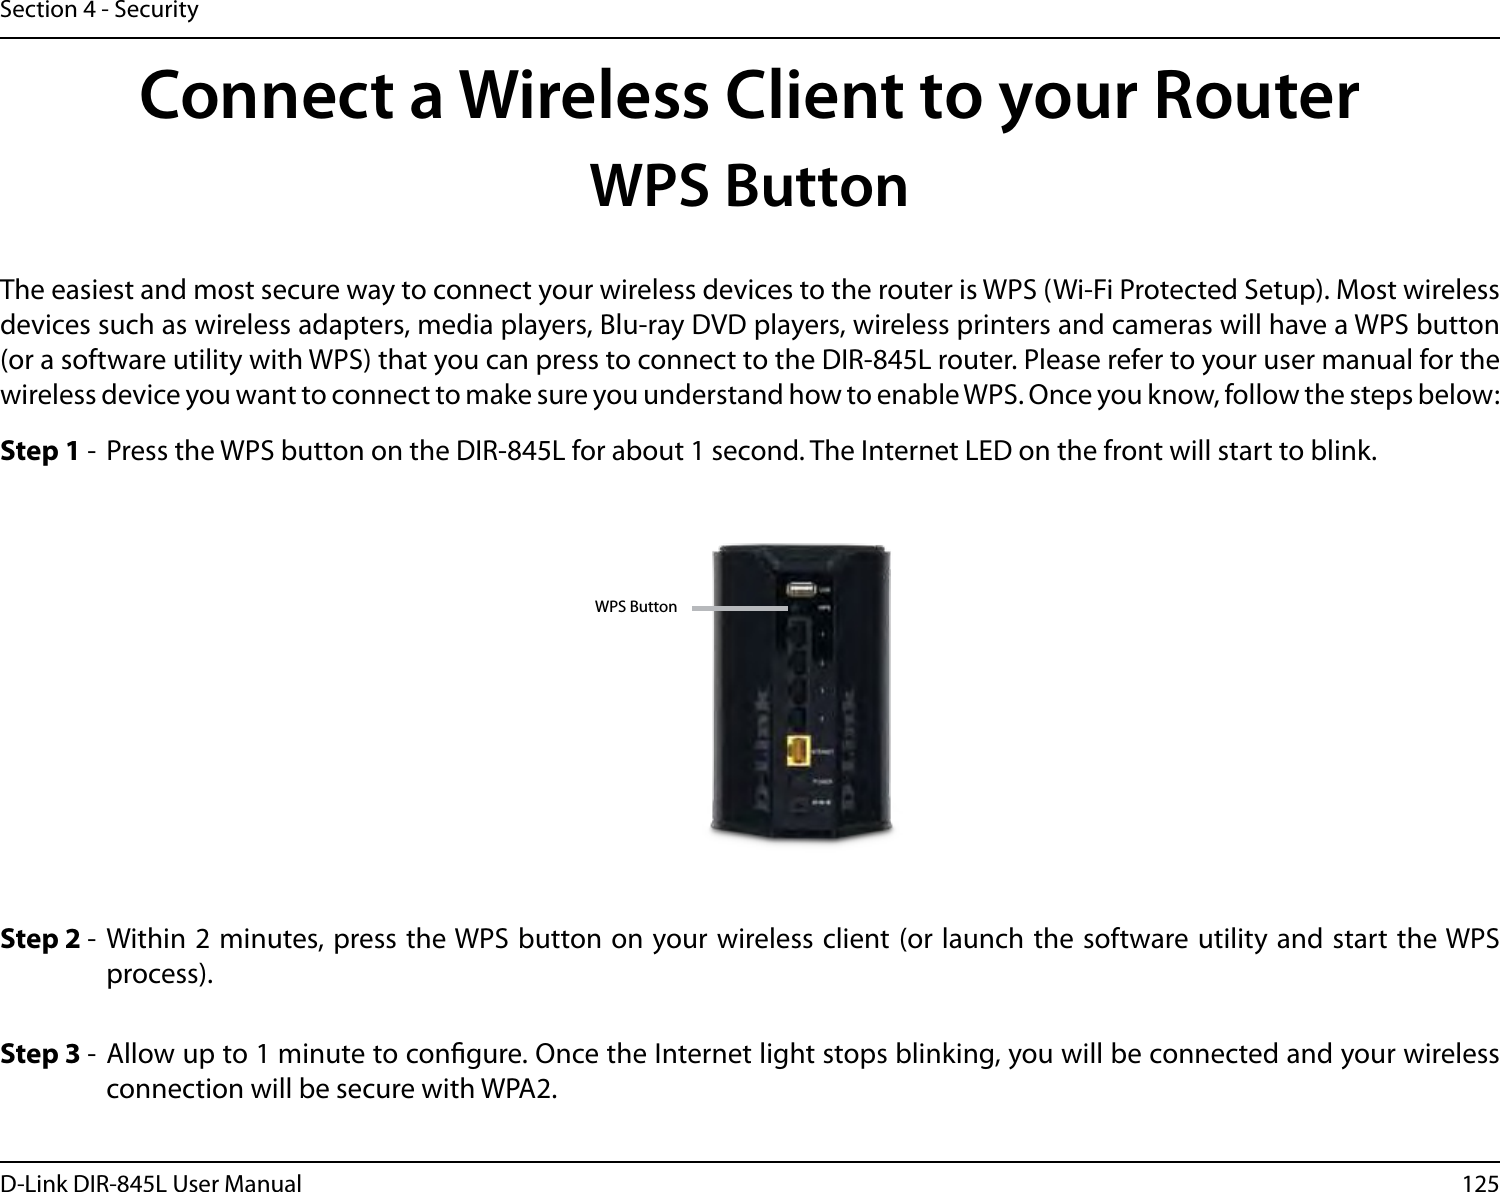 125D-Link DIR-845L User ManualSection 4 - SecurityConnect a Wireless Client to your RouterWPS ButtonStep 2 -  Within 2 minutes, press the WPS button on your wireless client (or launch the software utility and  start the WPS process).The easiest and most secure way to connect your wireless devices to the router is WPS (Wi-Fi Protected Setup). Most wireless devices such as wireless adapters, media players, Blu-ray DVD players, wireless printers and cameras will have a WPS button (or a software utility with WPS) that you can press to connect to the DIR-845L router. Please refer to your user manual for the wireless device you want to connect to make sure you understand how to enable WPS. Once you know, follow the steps below:Step 1 -  Press the WPS button on the DIR-845L for about 1 second. The Internet LED on the front will start to blink.Step 3 -  Allow up to 1 minute to congure. Once the Internet light stops blinking, you will be connected and your wireless connection will be secure with WPA2.WPS Button